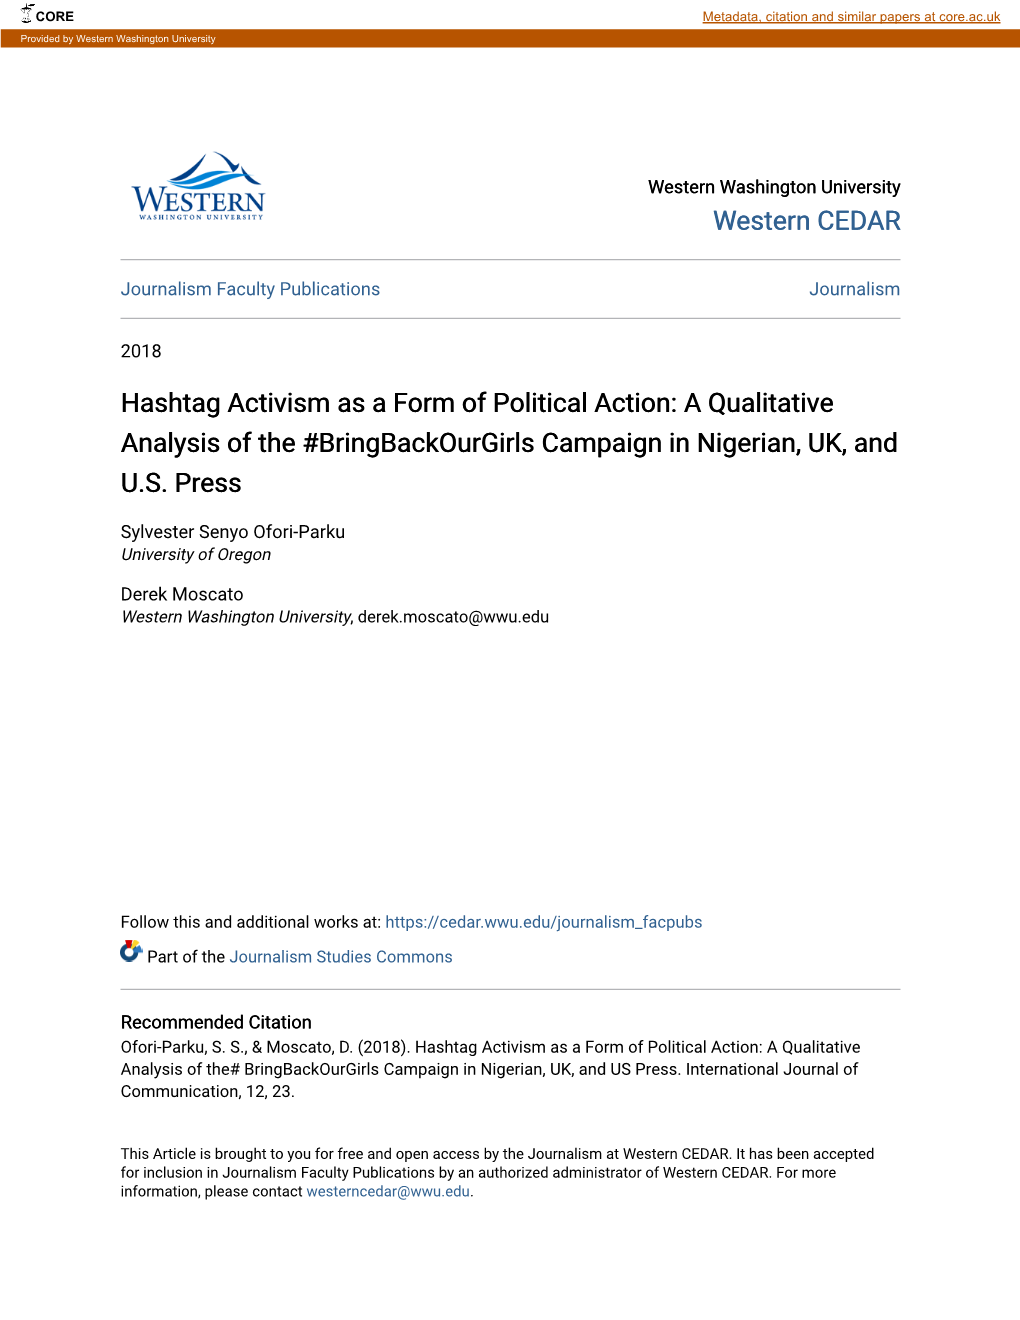 Hashtag Activism As a Form of Political Action: a Qualitative Analysis of the #Bringbackourgirls Campaign in Nigerian, UK, and U.S